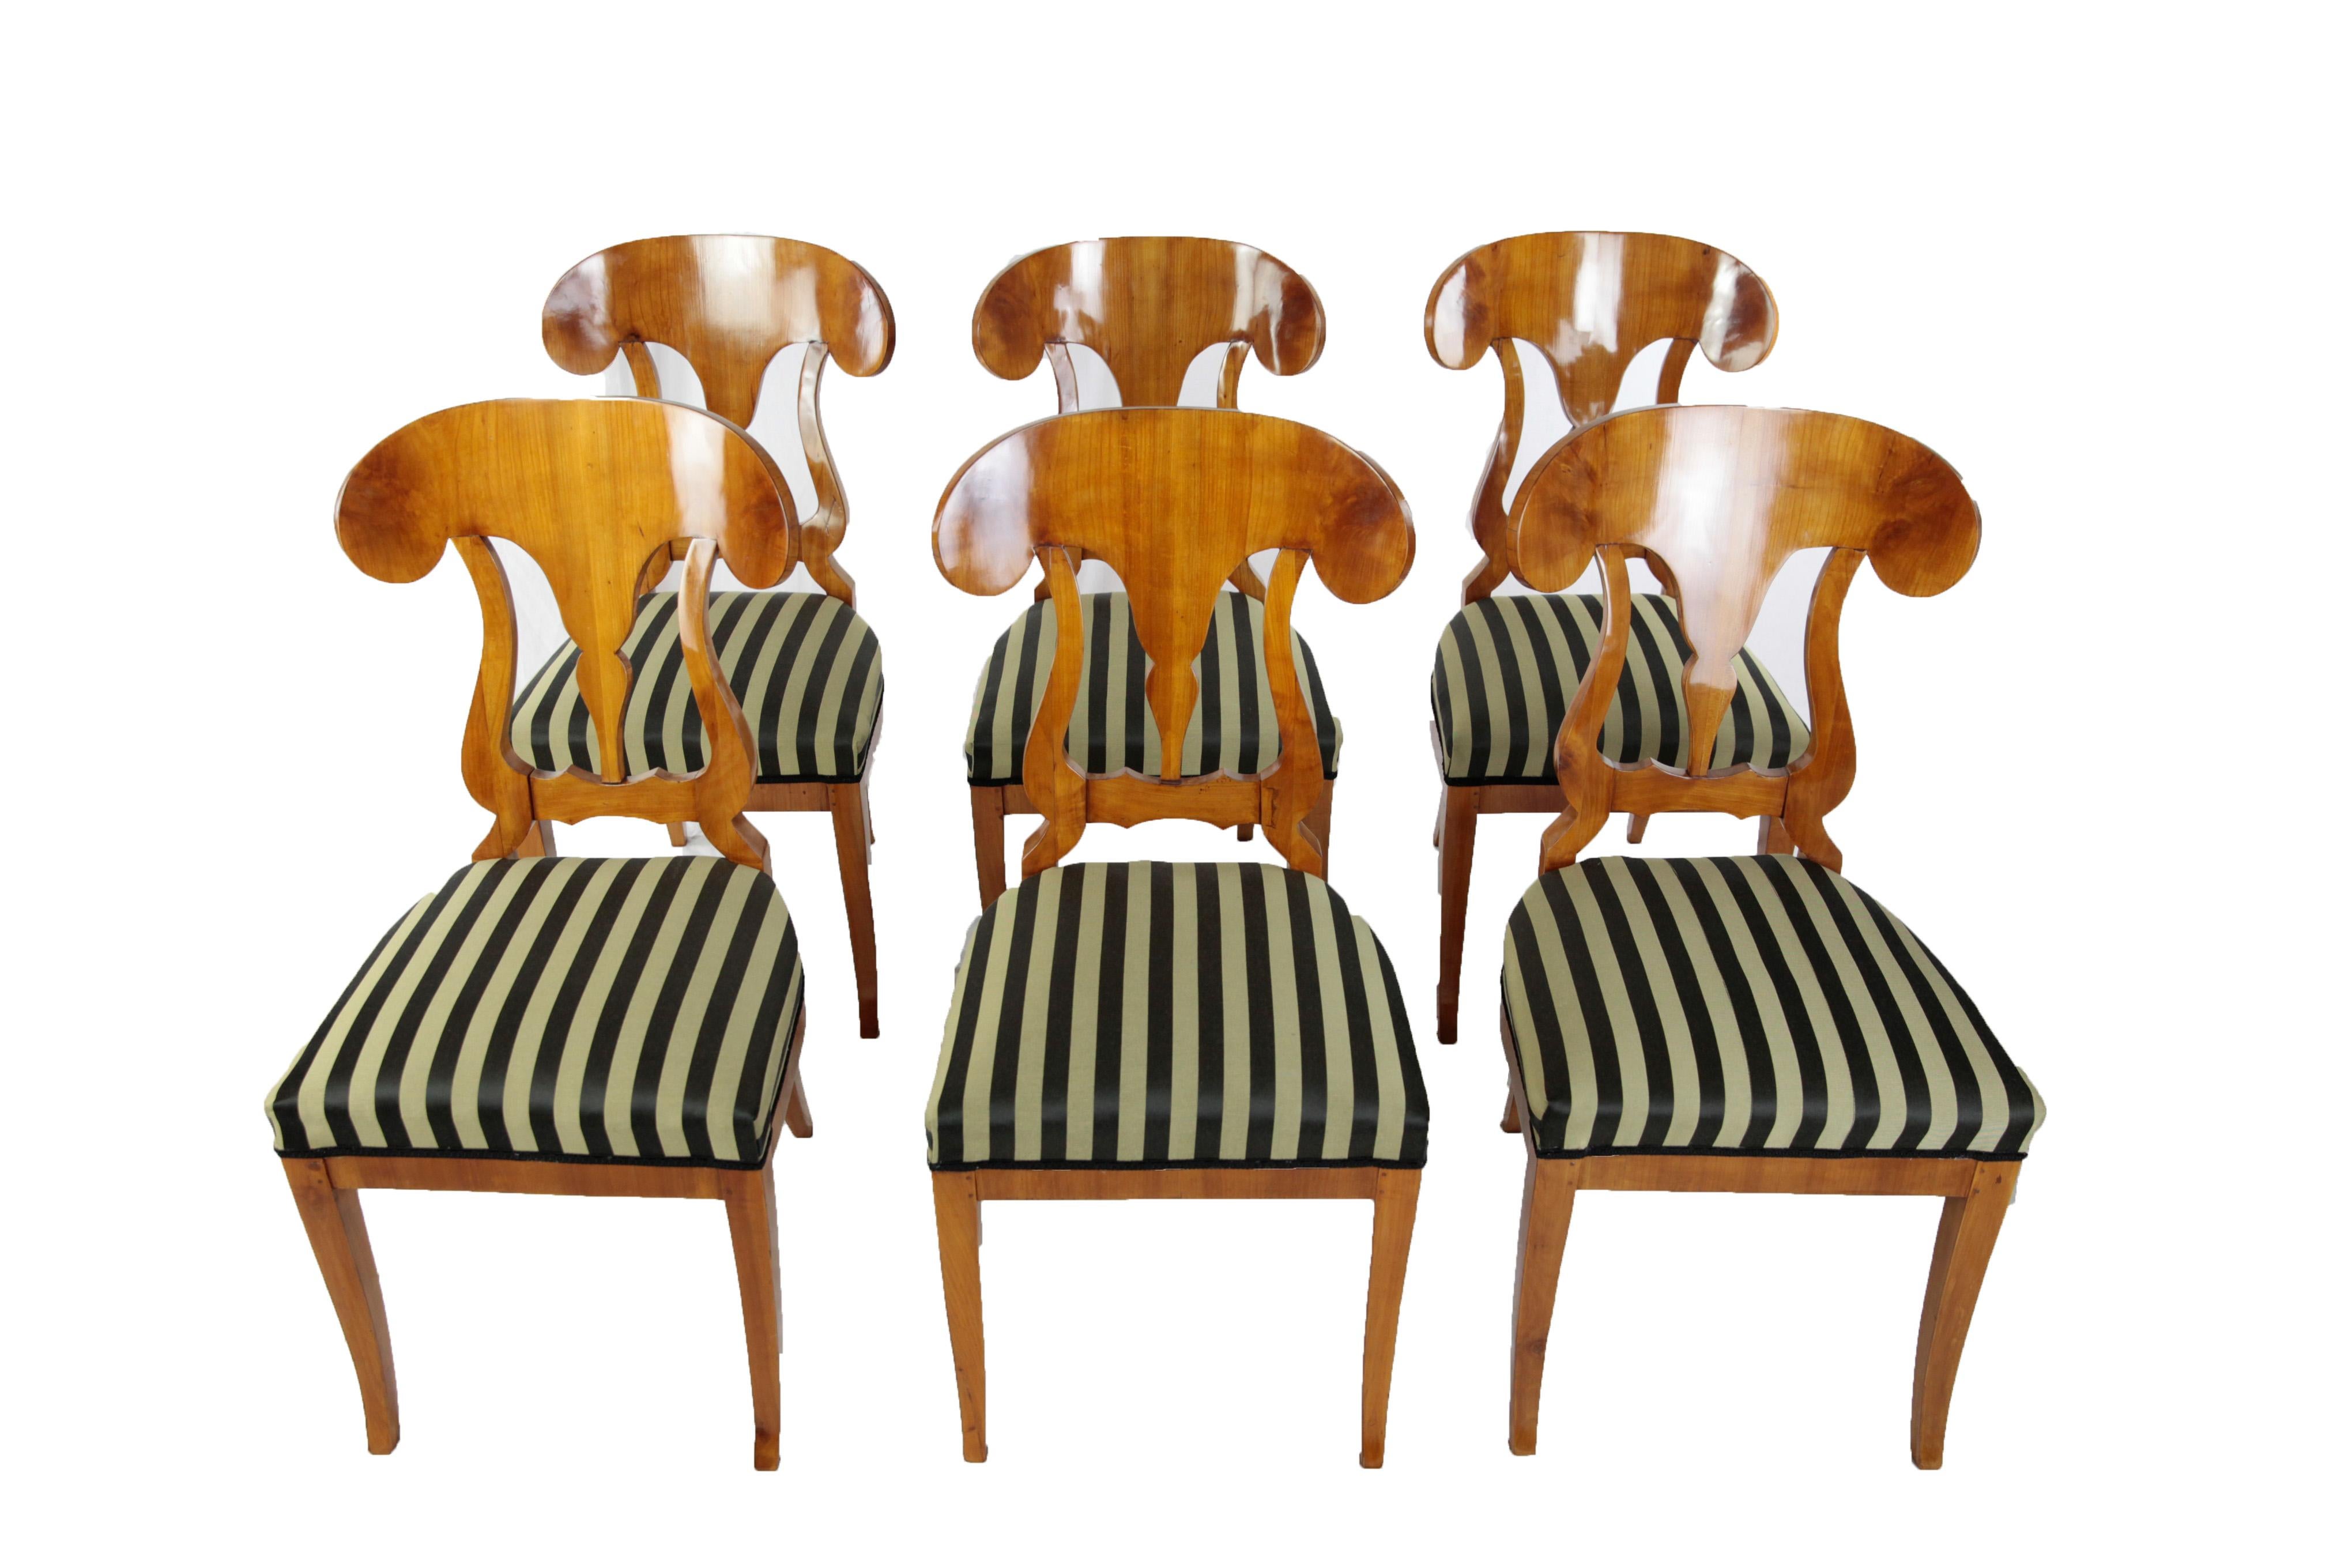 Set of 6 chairs made of cherrywood veneered, made circa 1850-1860 in Germany. The legs of the chairs are slightly concave. The seat of the chairs was newly upholstered and covered with a striped cotton-mix fabric. The backrests are moving in shape